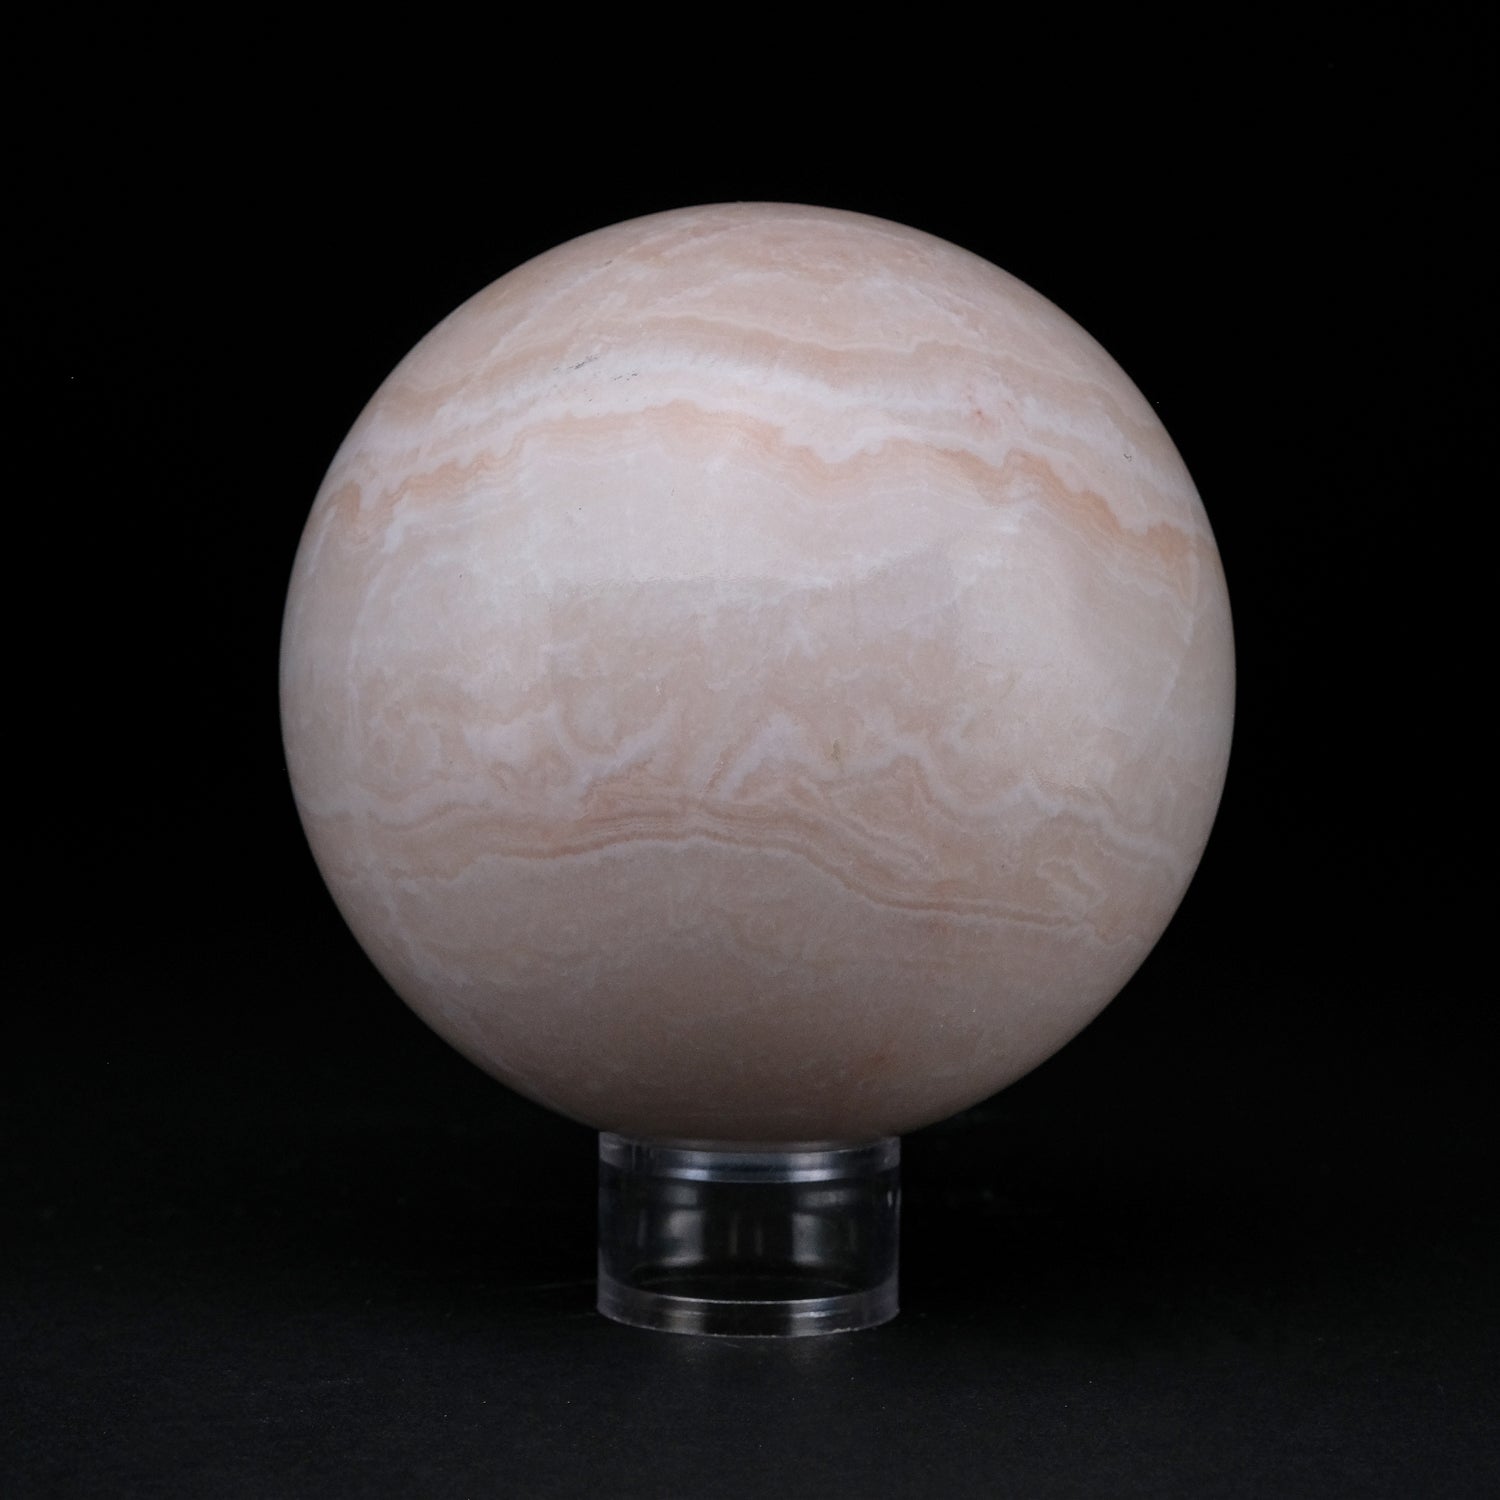 Genuine Polished Gemmy Pink Onyx Sphere from Mexico (3 lbs)